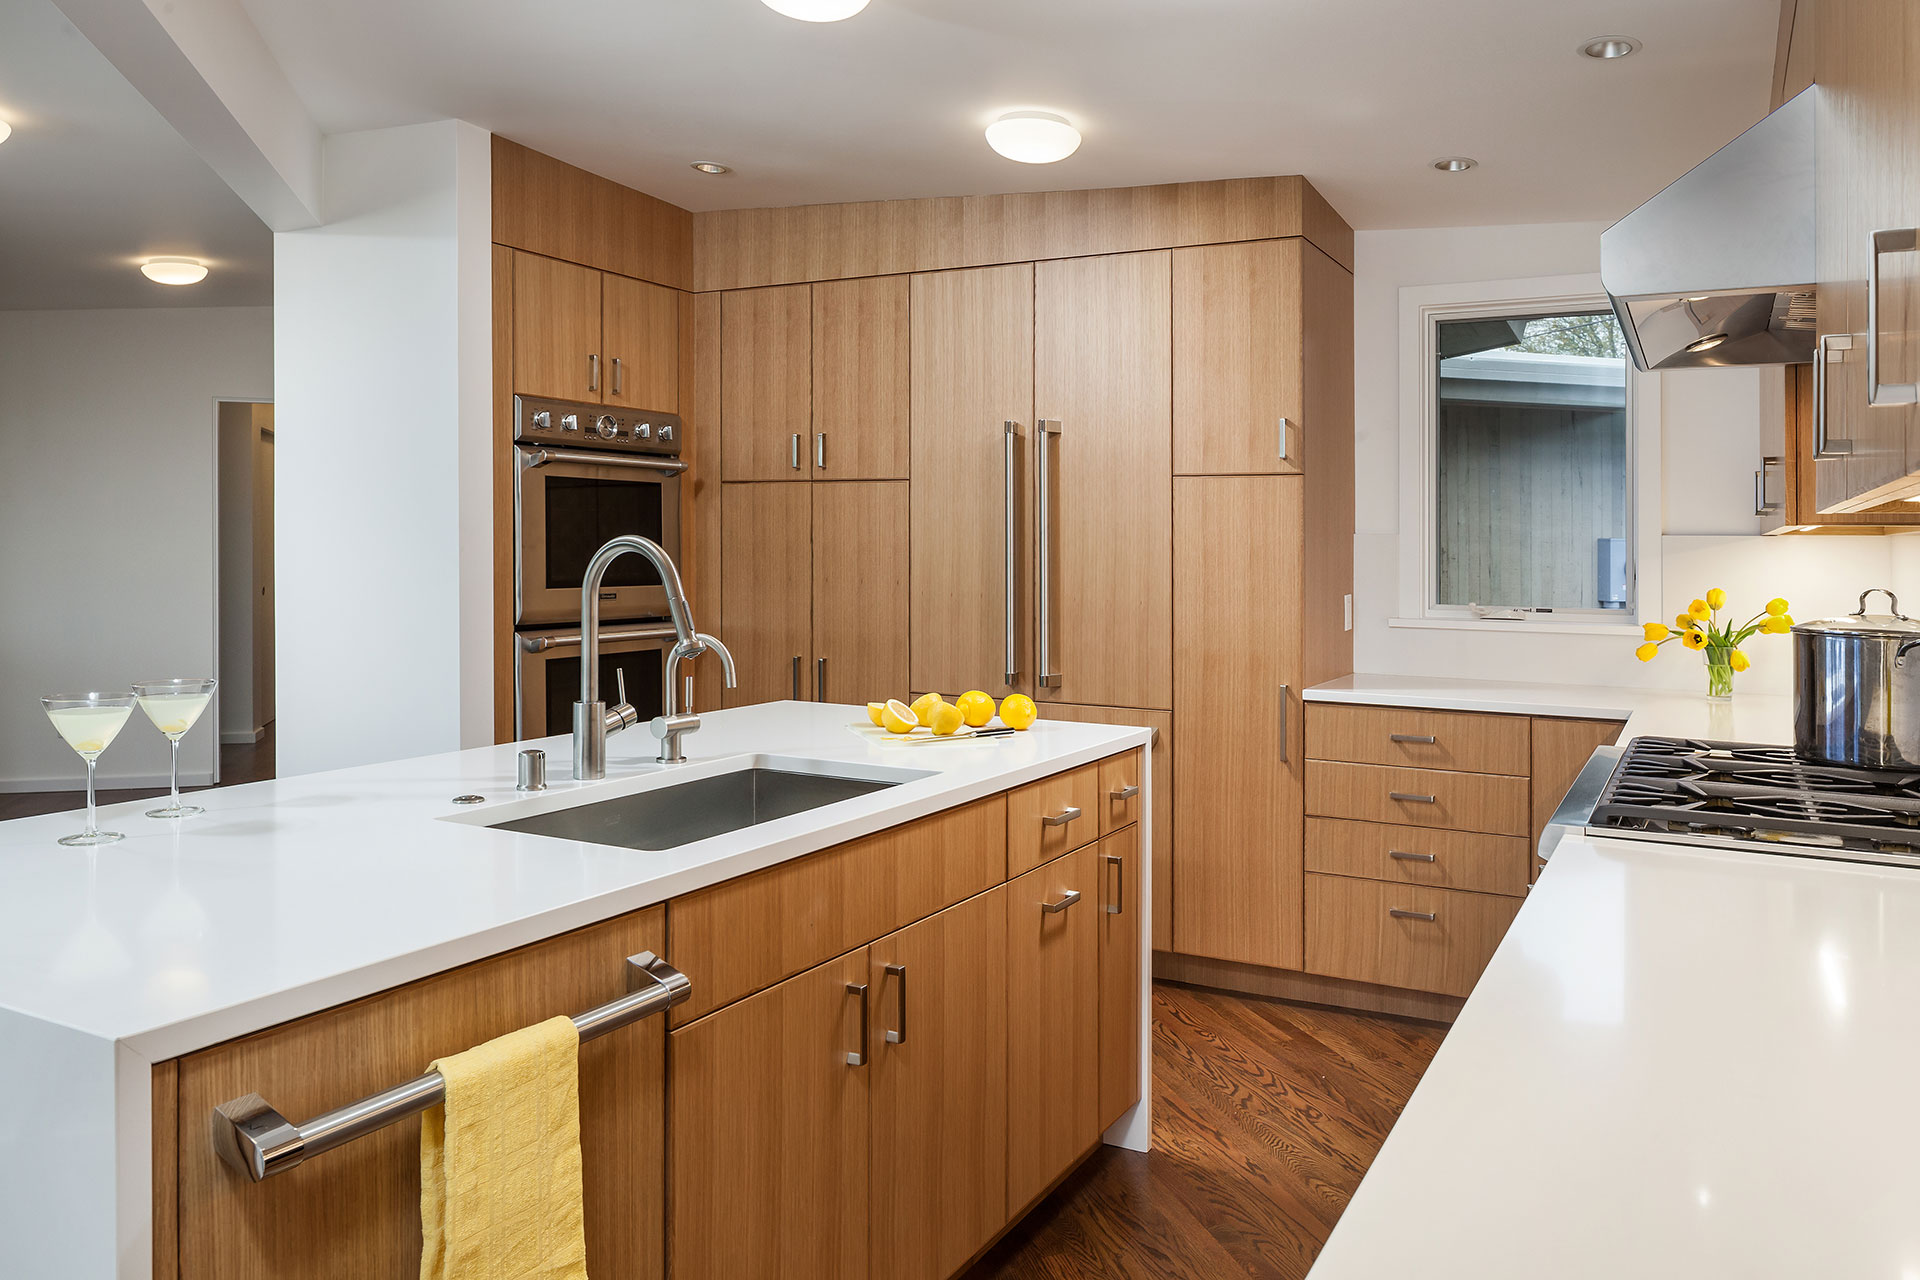 The renovated kitchen features a built in refrigerator and dishwasher with custom panels that match the adjacent cabinetry.